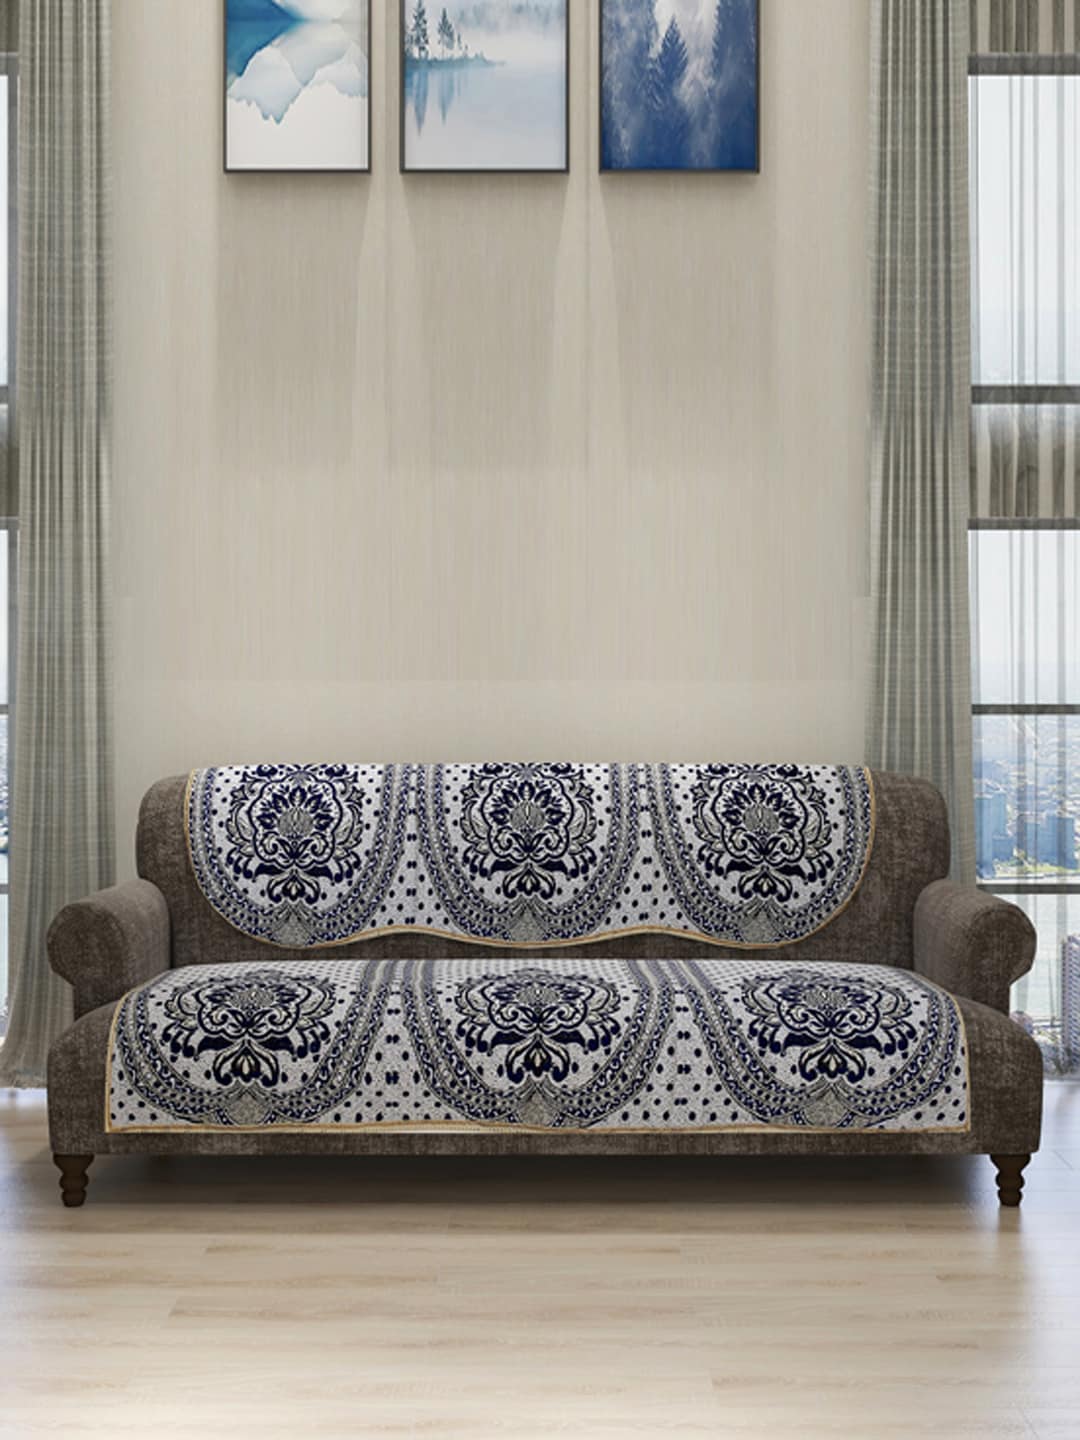 ROMEE 6-Piece Off-White & Blue Woven Design Chenille Sofa Set Covers Price in India